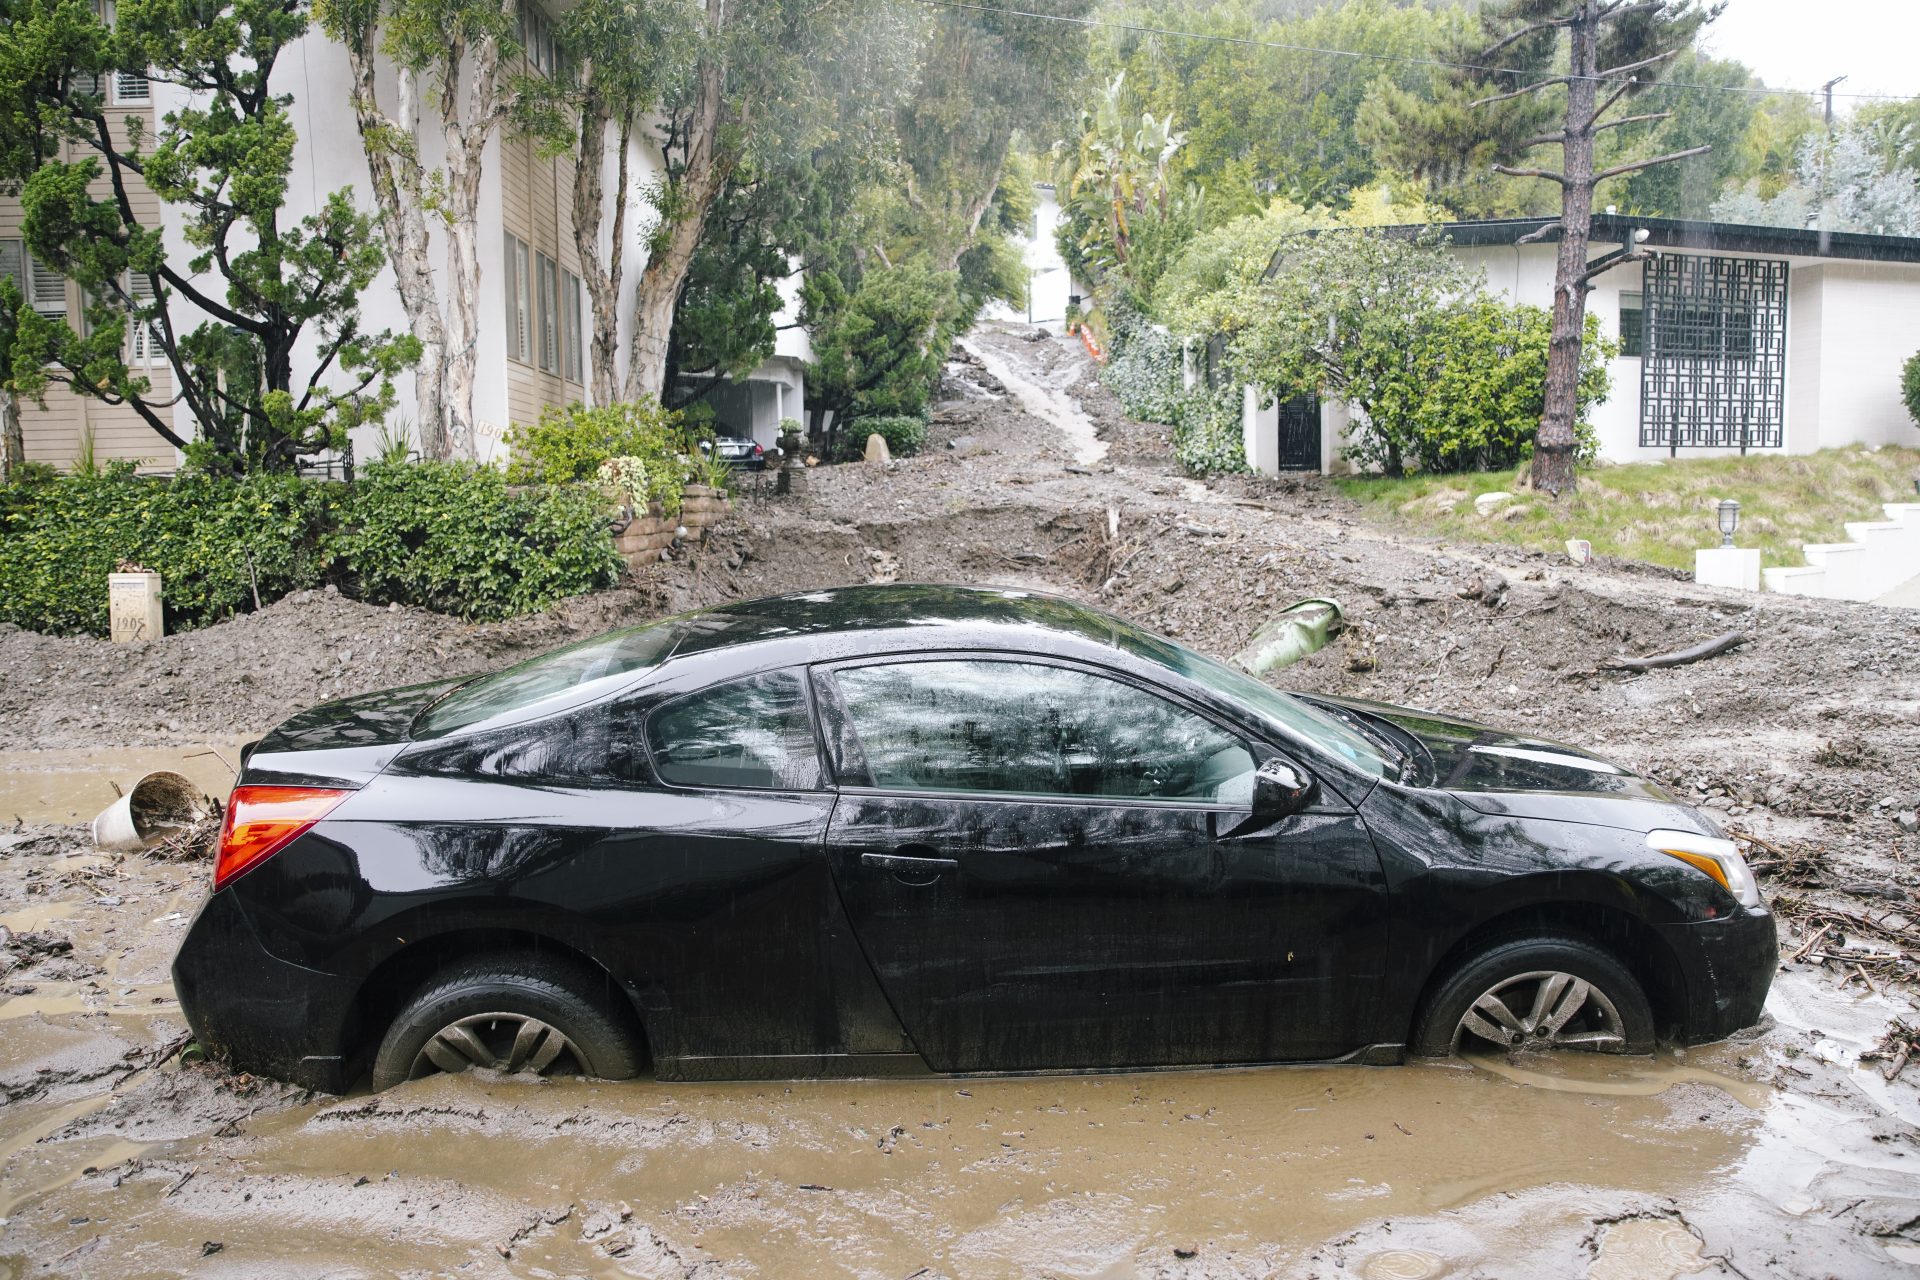 In pictures: extraordinary rainfall causes flooding and landslides in California